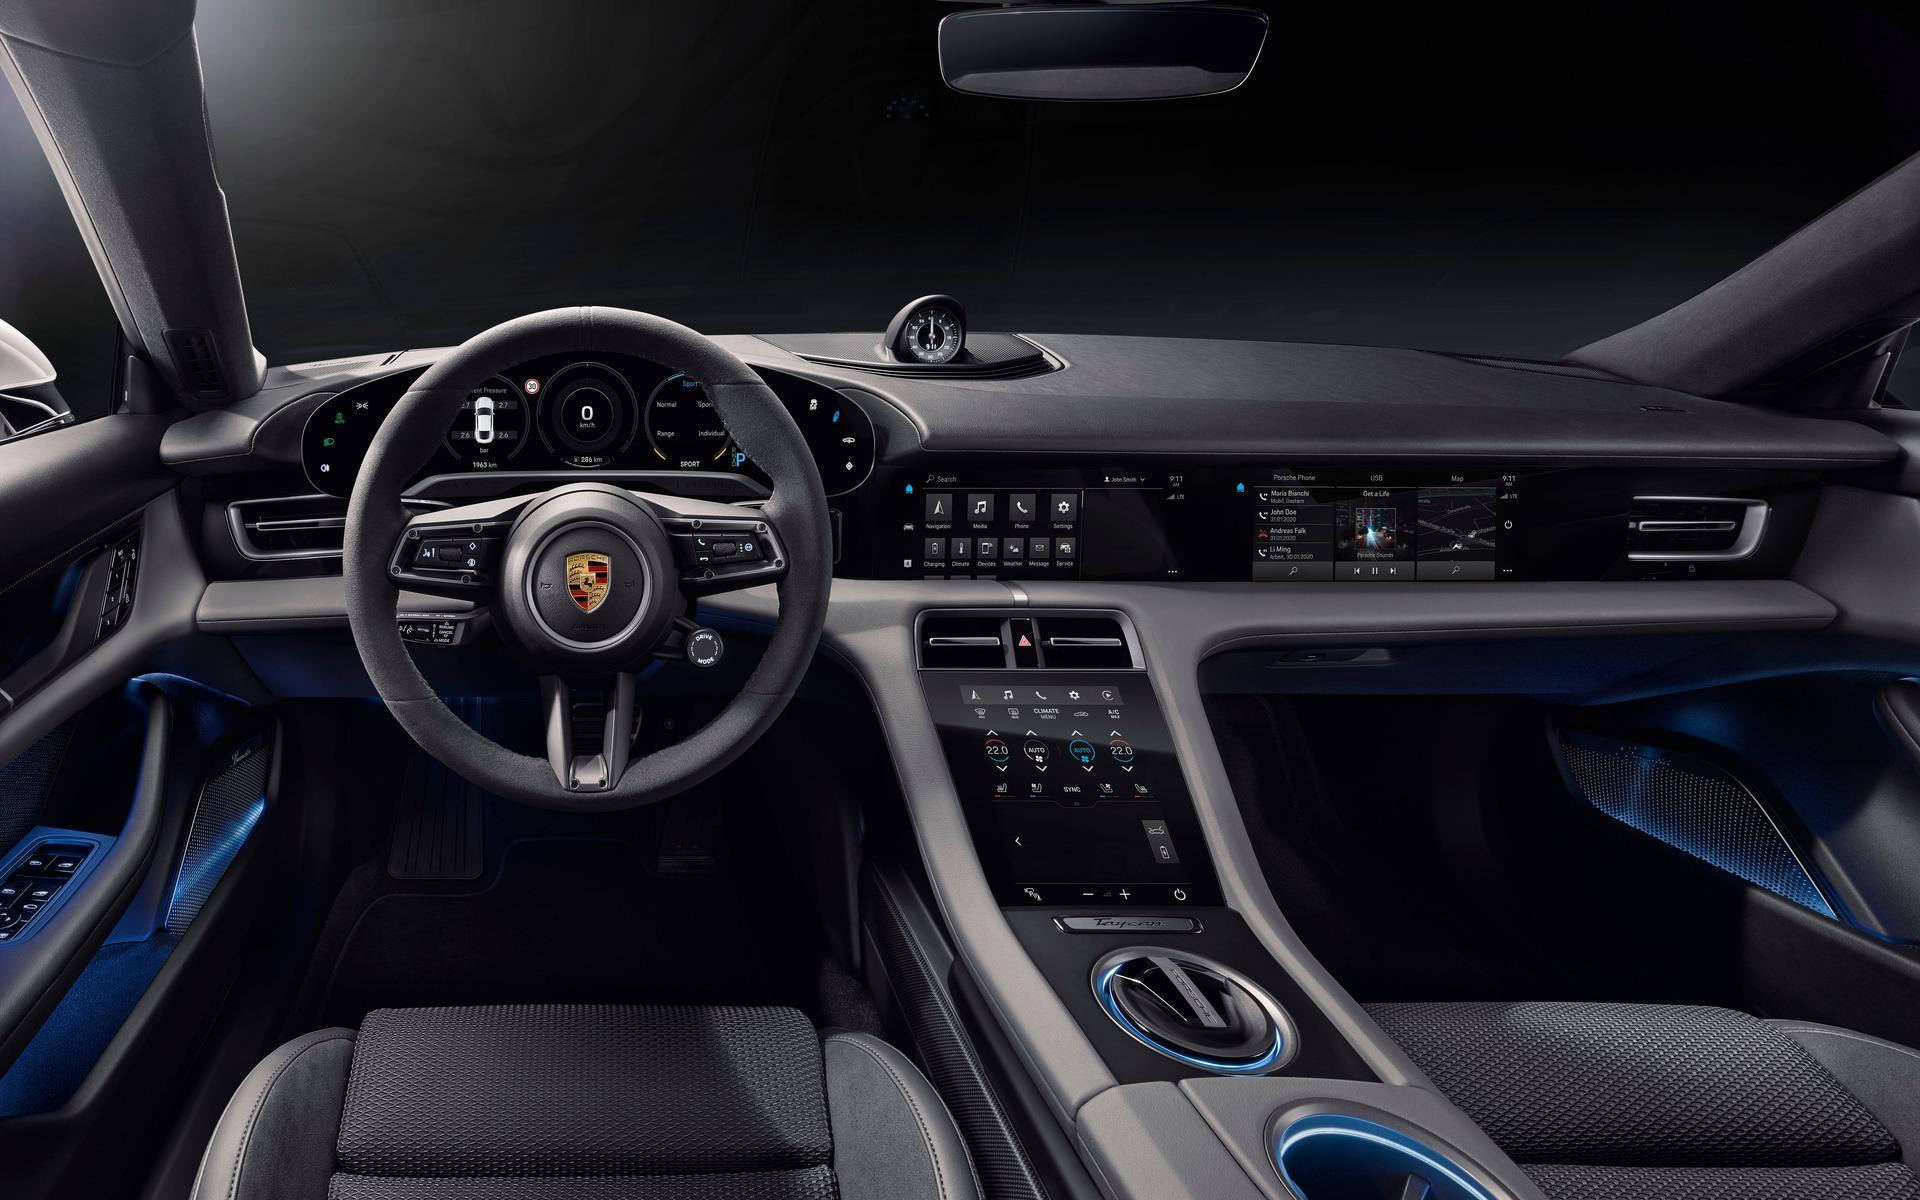 Porsche Taycan Interior Revealed Ahead of its Official Debut